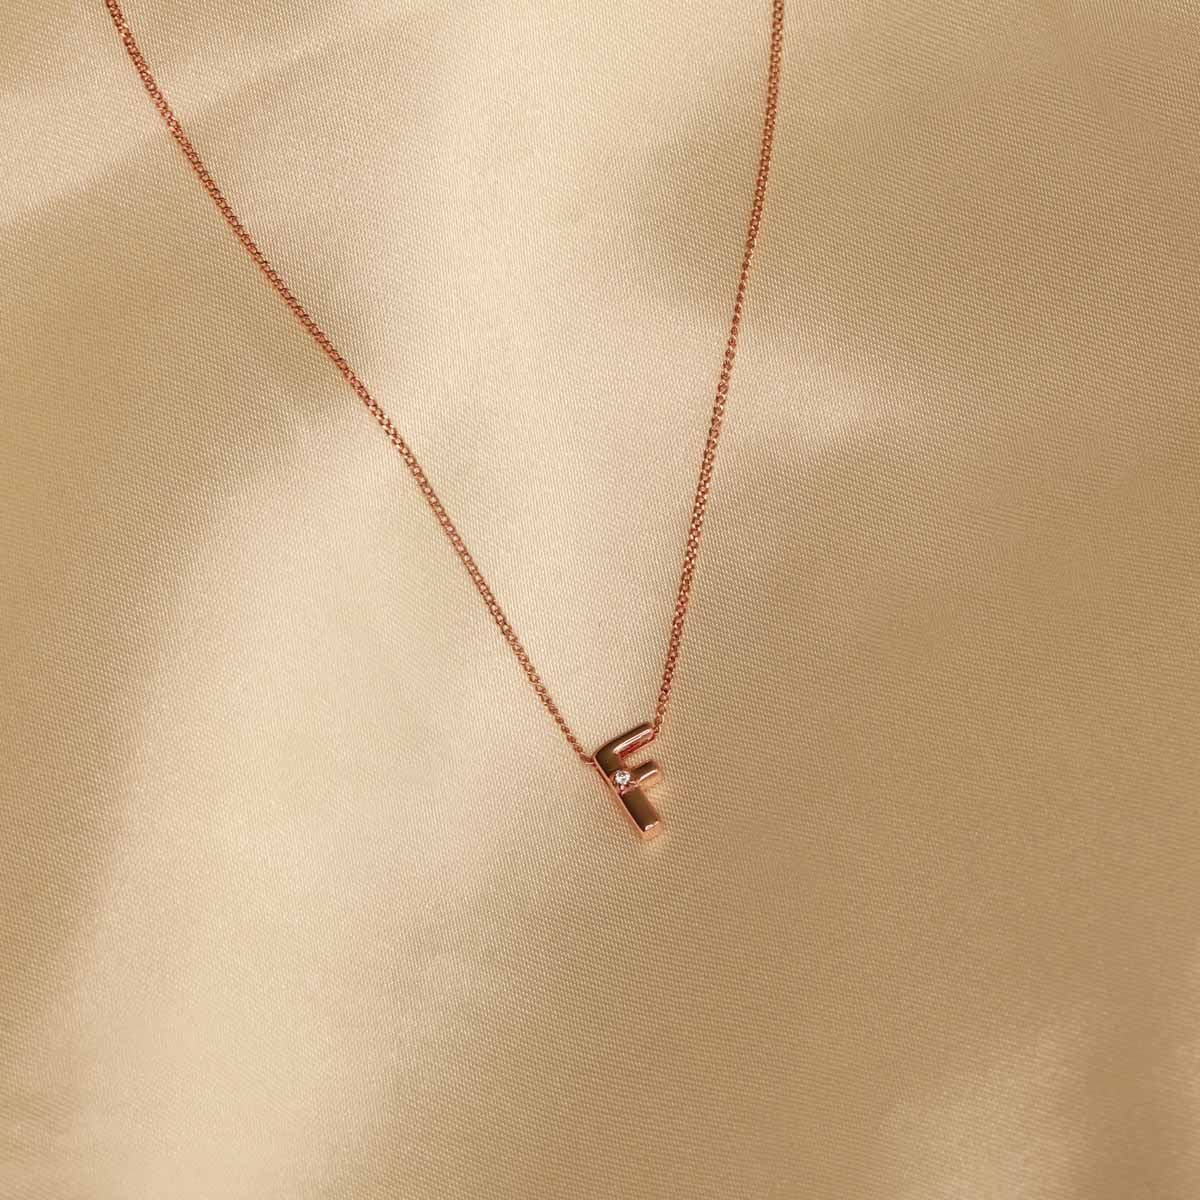 Flat lay shot of F Initial Pendant Necklace in Rose Gold